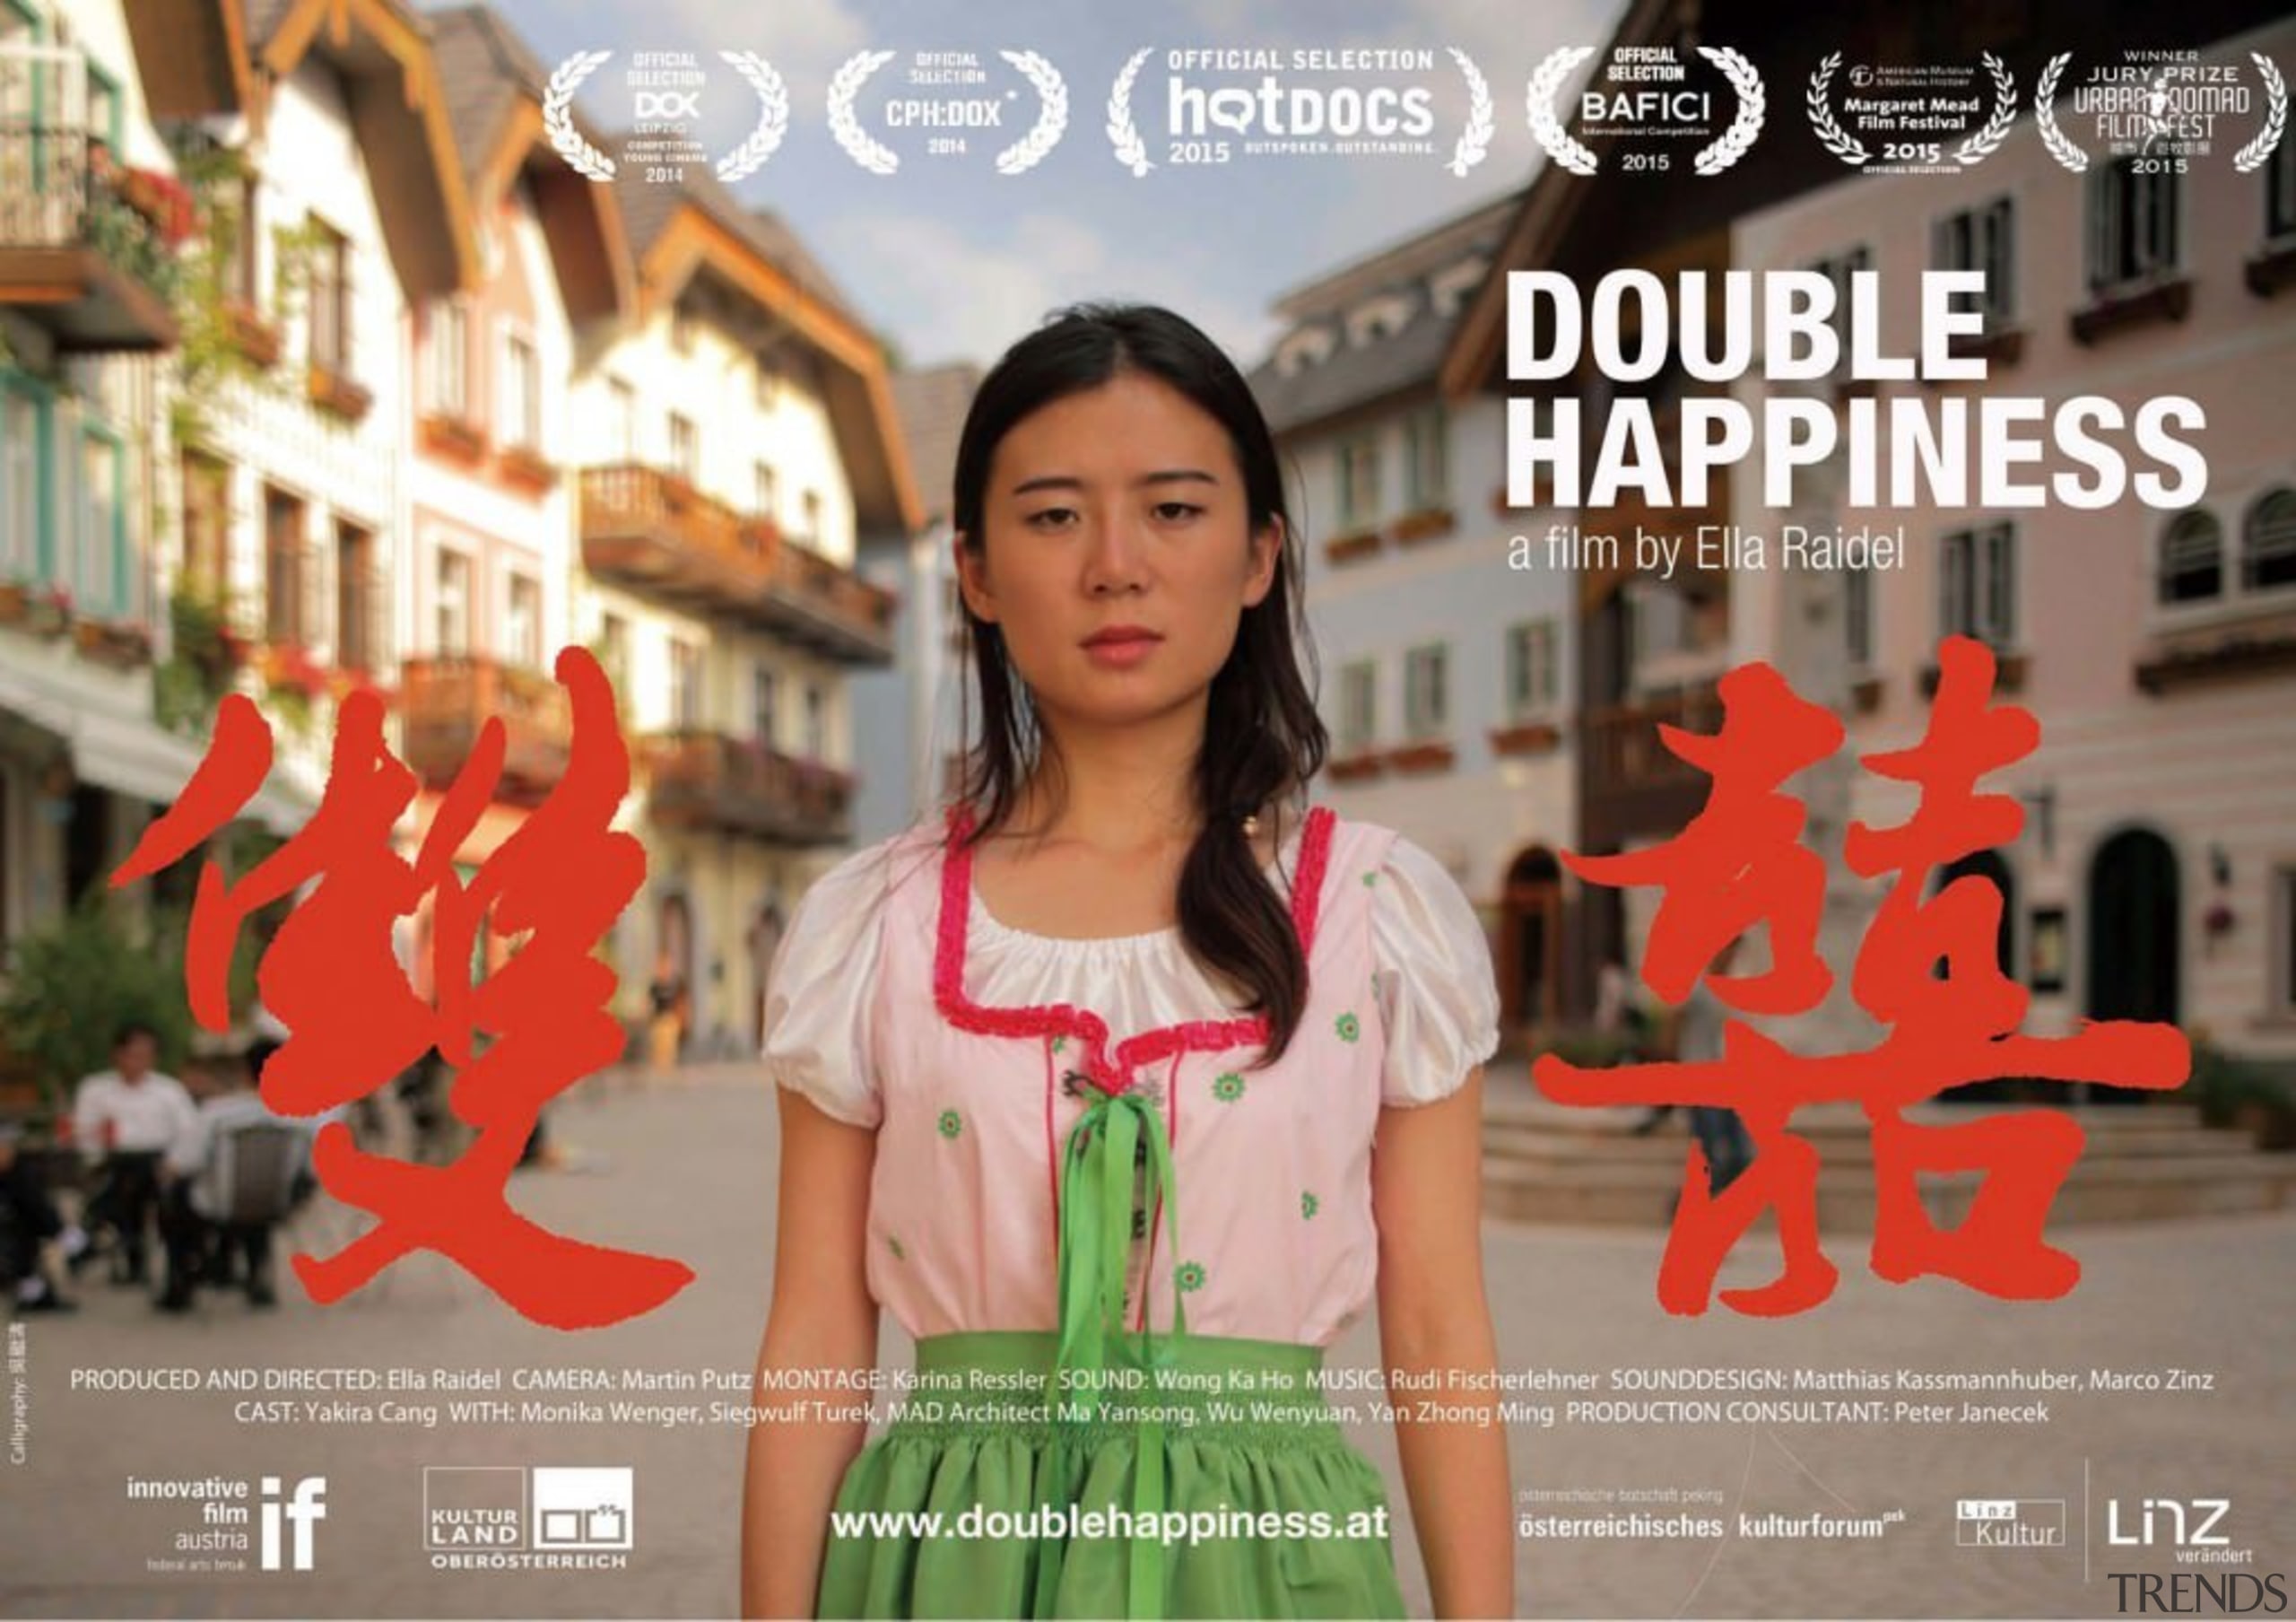 Directed by Ella Raidel - Film: Double Happiness advertising, gray